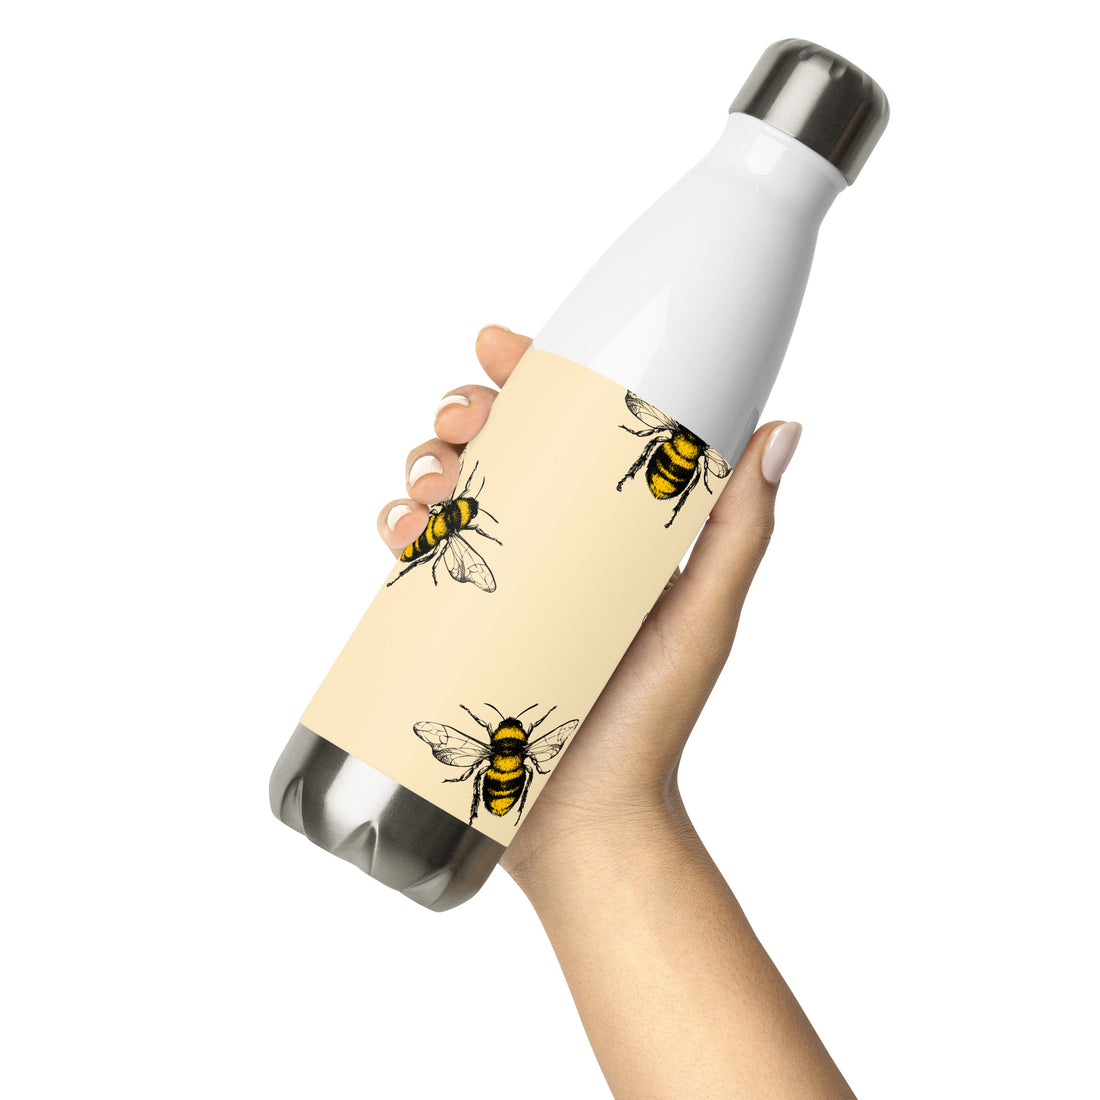 Bees Stainless Steel Water Bottle